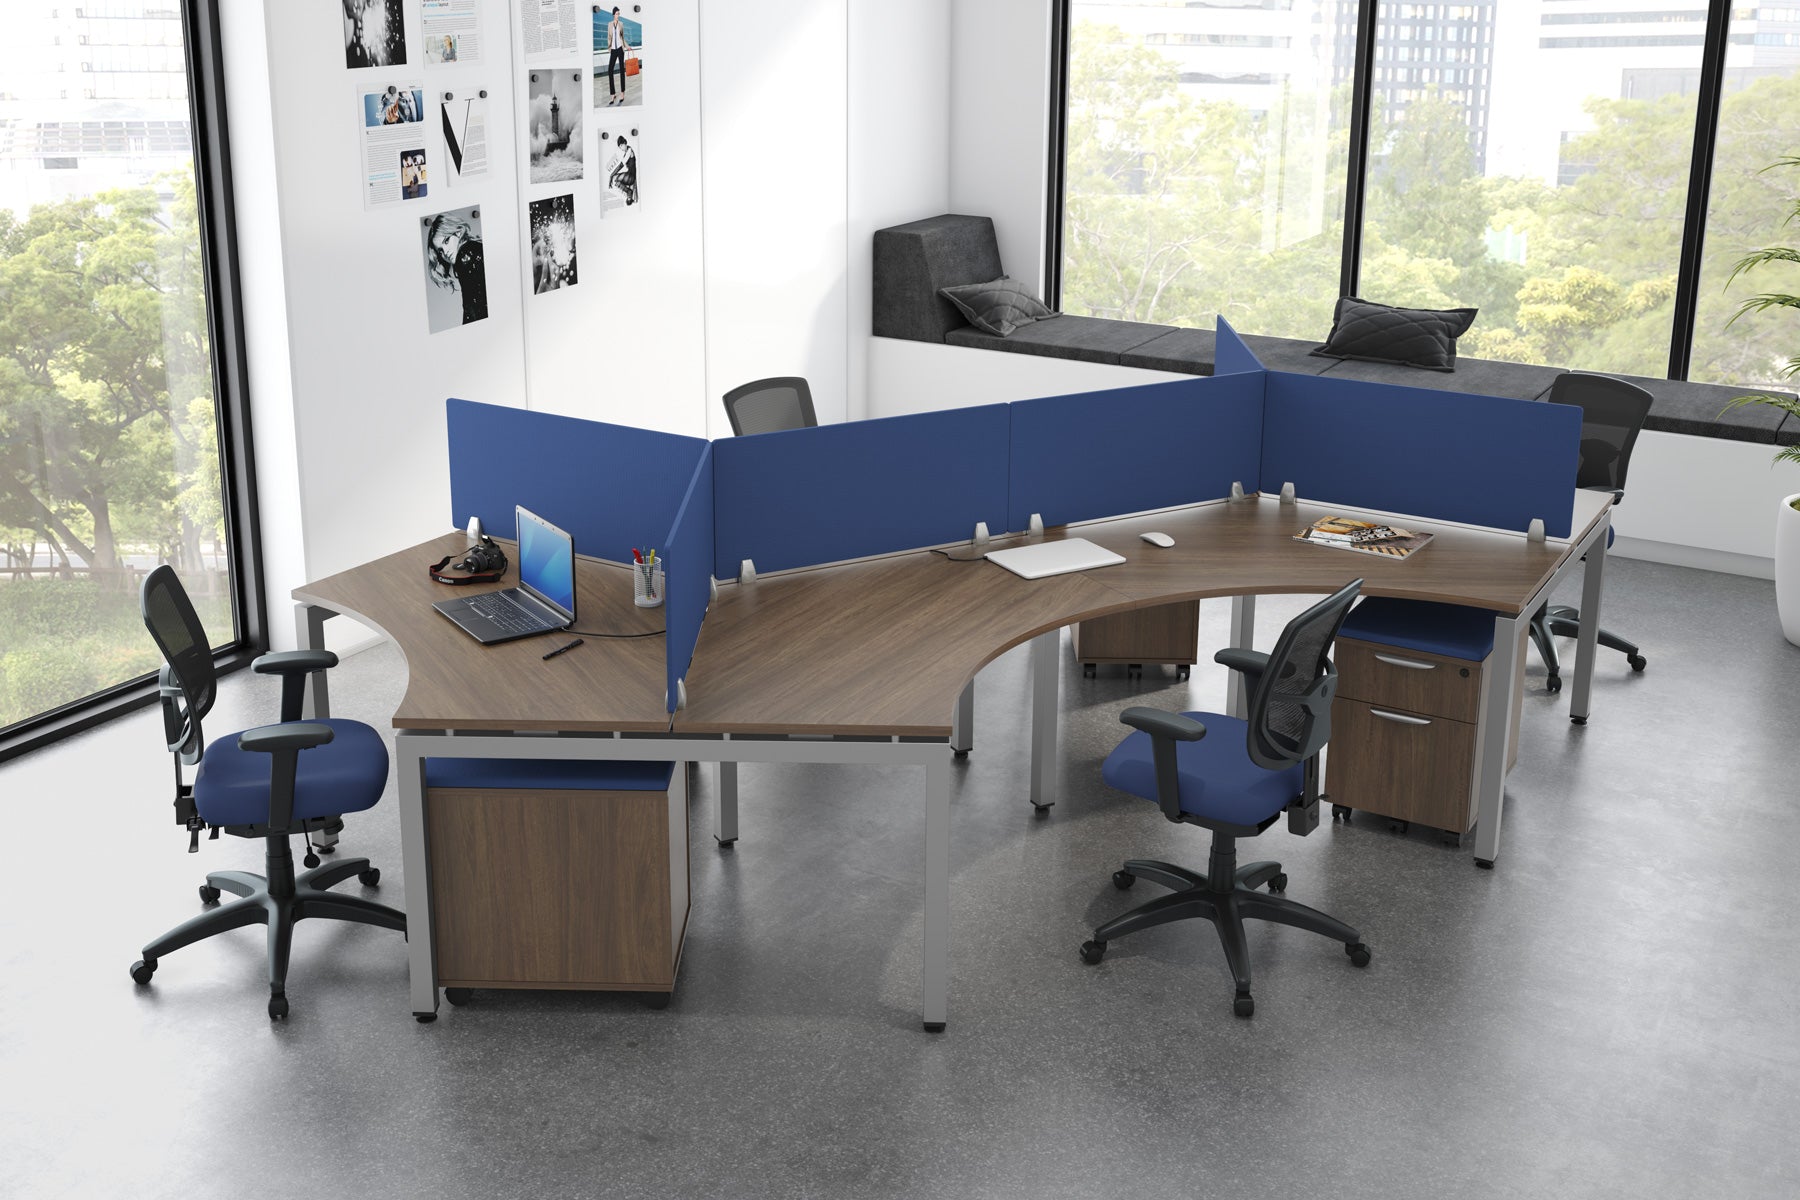 Coworking furniture. Office furniture for shared workspaces